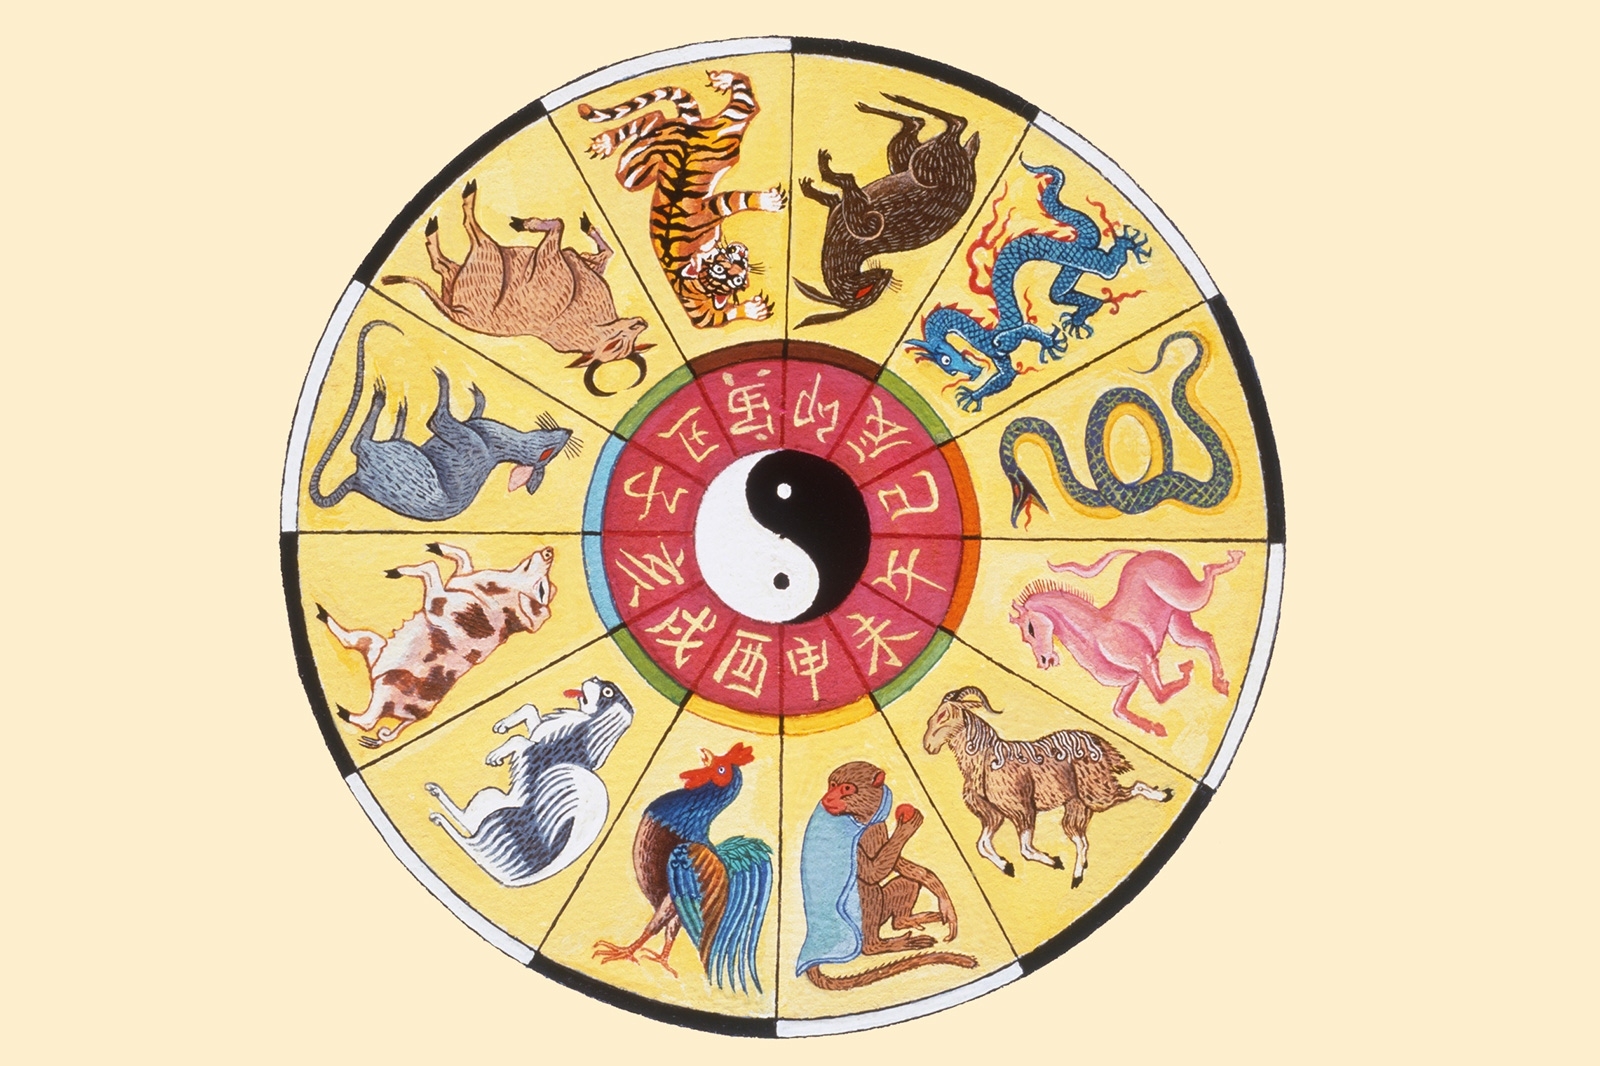 Chinese New Year Zodiac Charts | Lovetoknow Chinese Calendar For Zodiac Signs